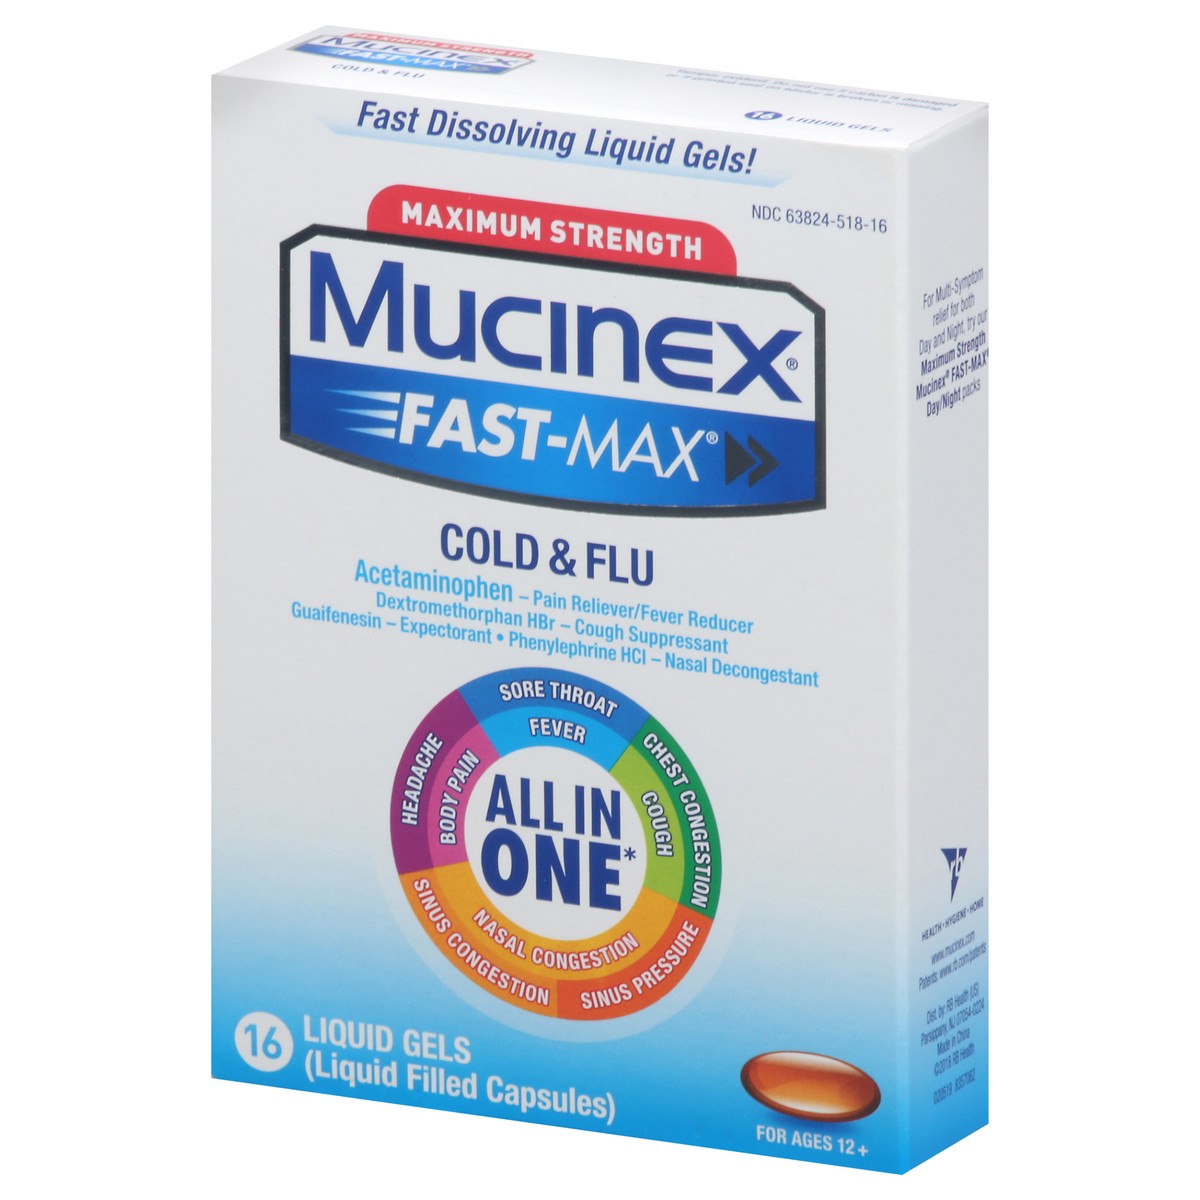 slide 3 of 9, Mucinex Maximum Strength Mucinex Fast-Max Cold & Flu All-In-One Liquid Gels, 16ct (Packaging May Vary), 16 oz